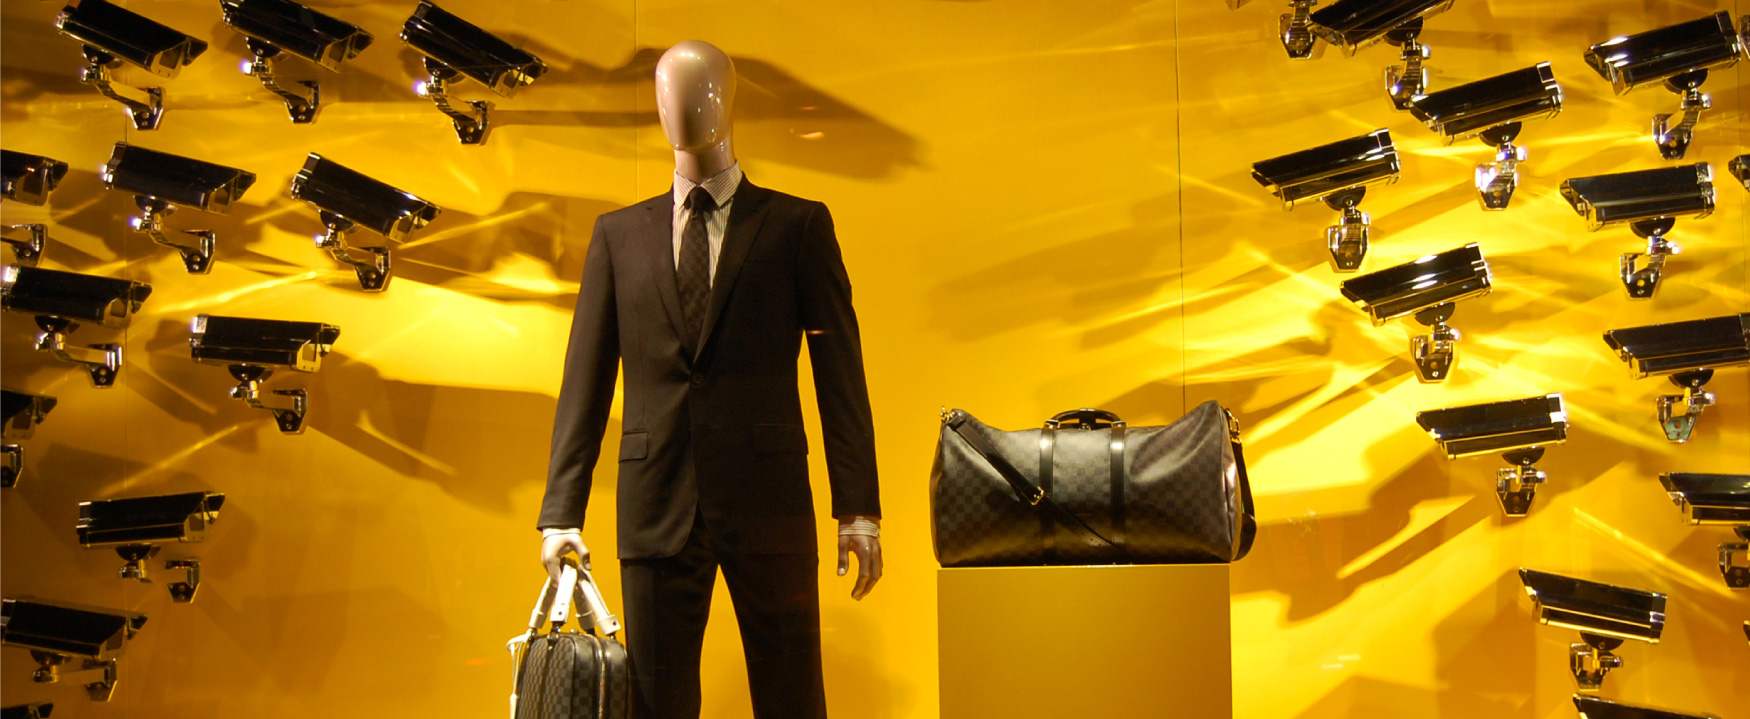 A display shows a mannequin dressed in a business suit, holding a designer bag, with a second designer bag on a pedestal beside it. On the wall behind the mannequin are dozens of security cameras pointed at it, and the bags.